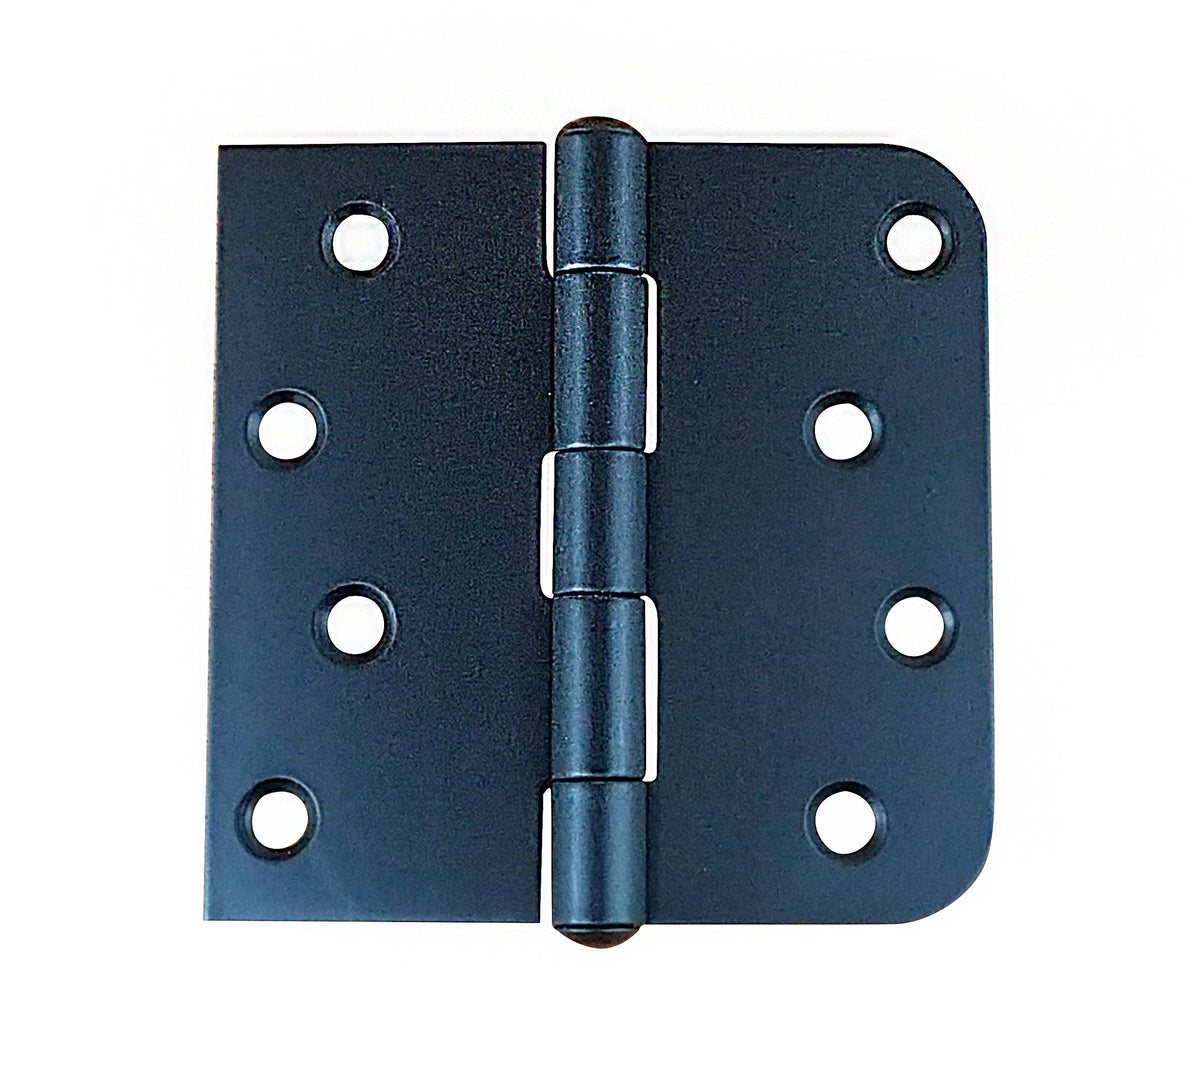 Stainless Steel Hinges - Black Stainless Steel Hinges Residential Hinges - 4" With 5/8" Square - Highly Rust Resistant - 3 Pack